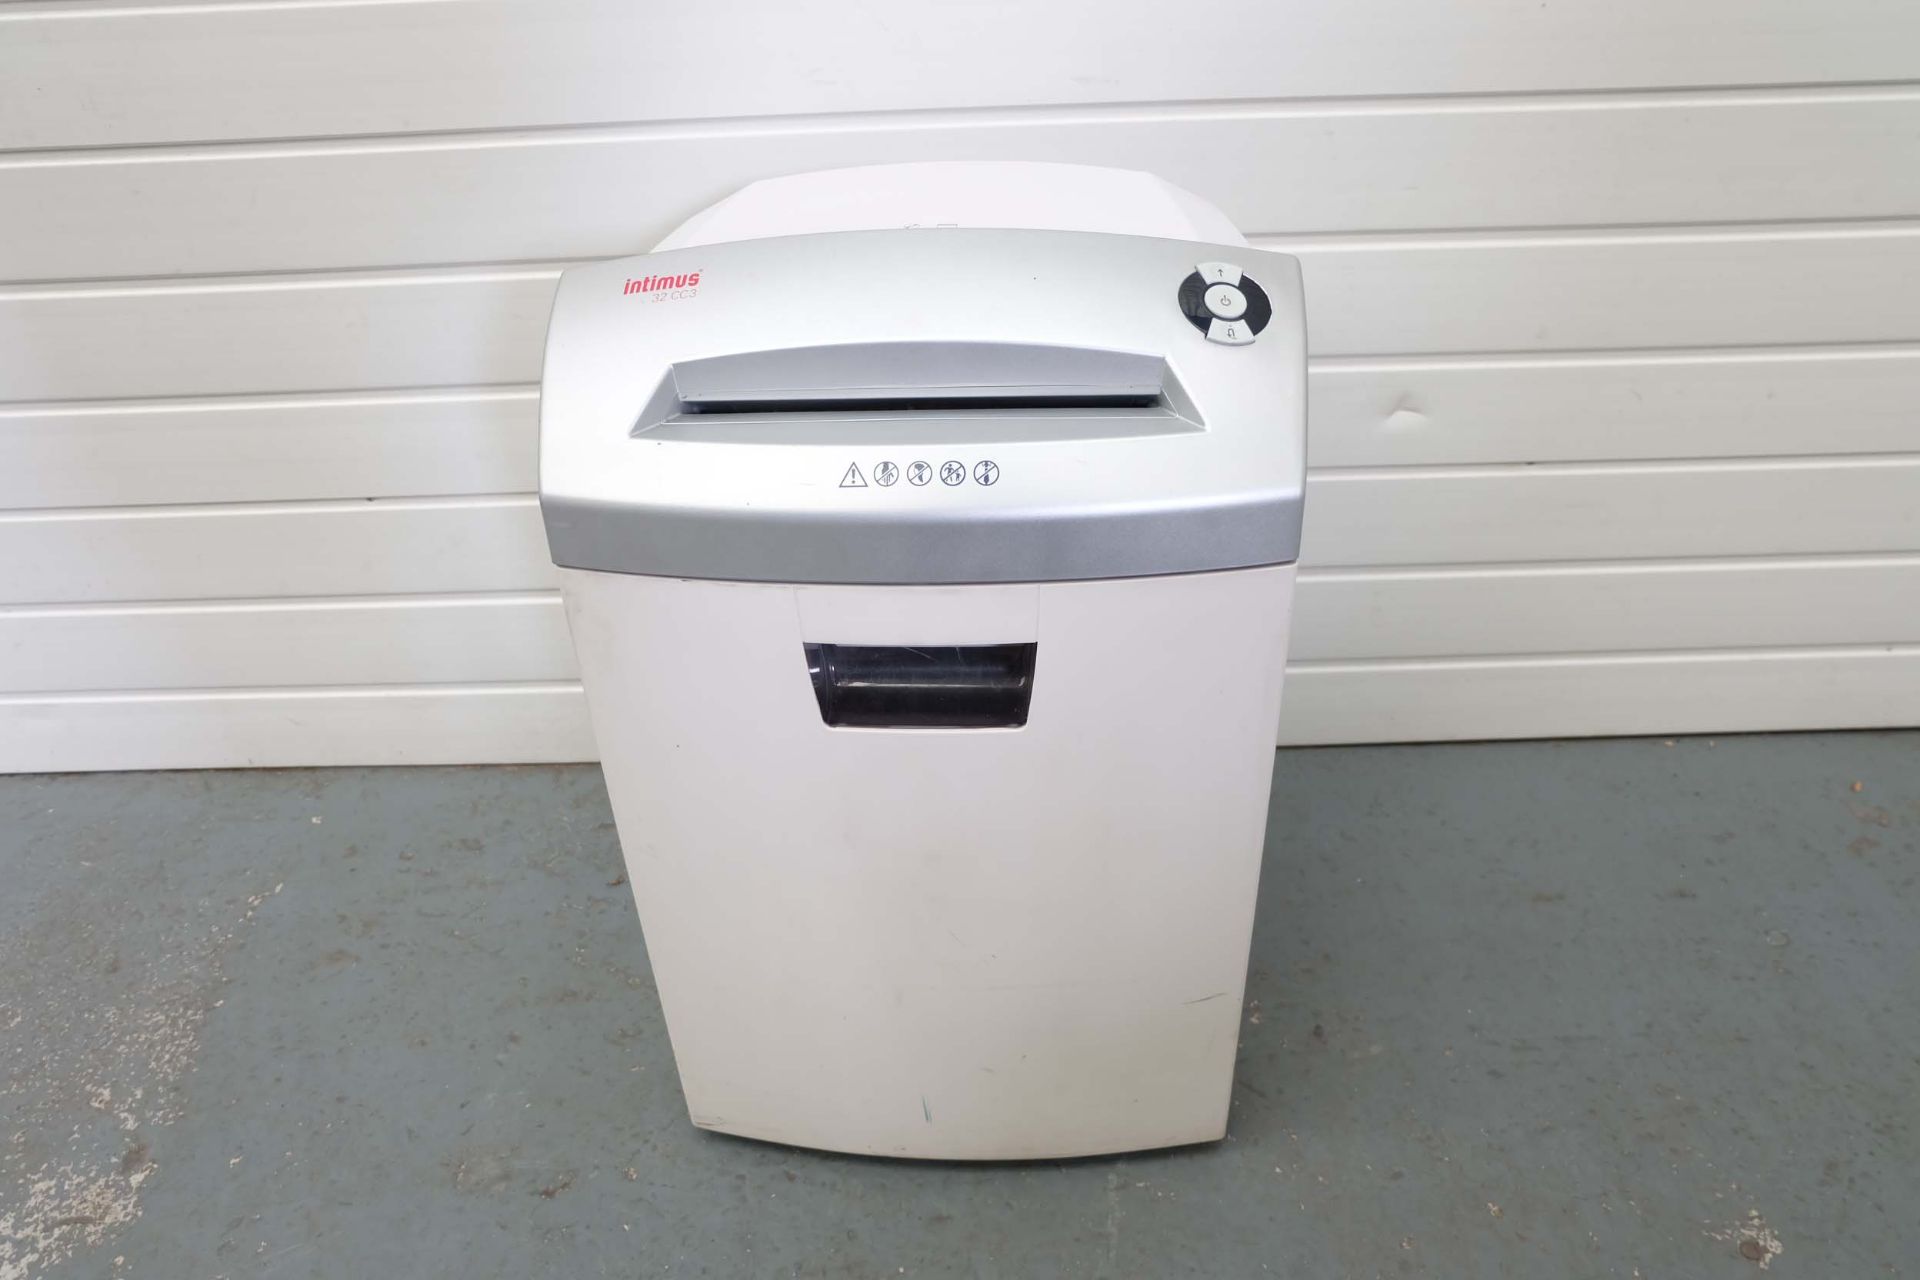 Martin Yale Model Intimus 32CC3 Cross Cut Shredder for Paper, CD's & Credit Cards. Year 2009.